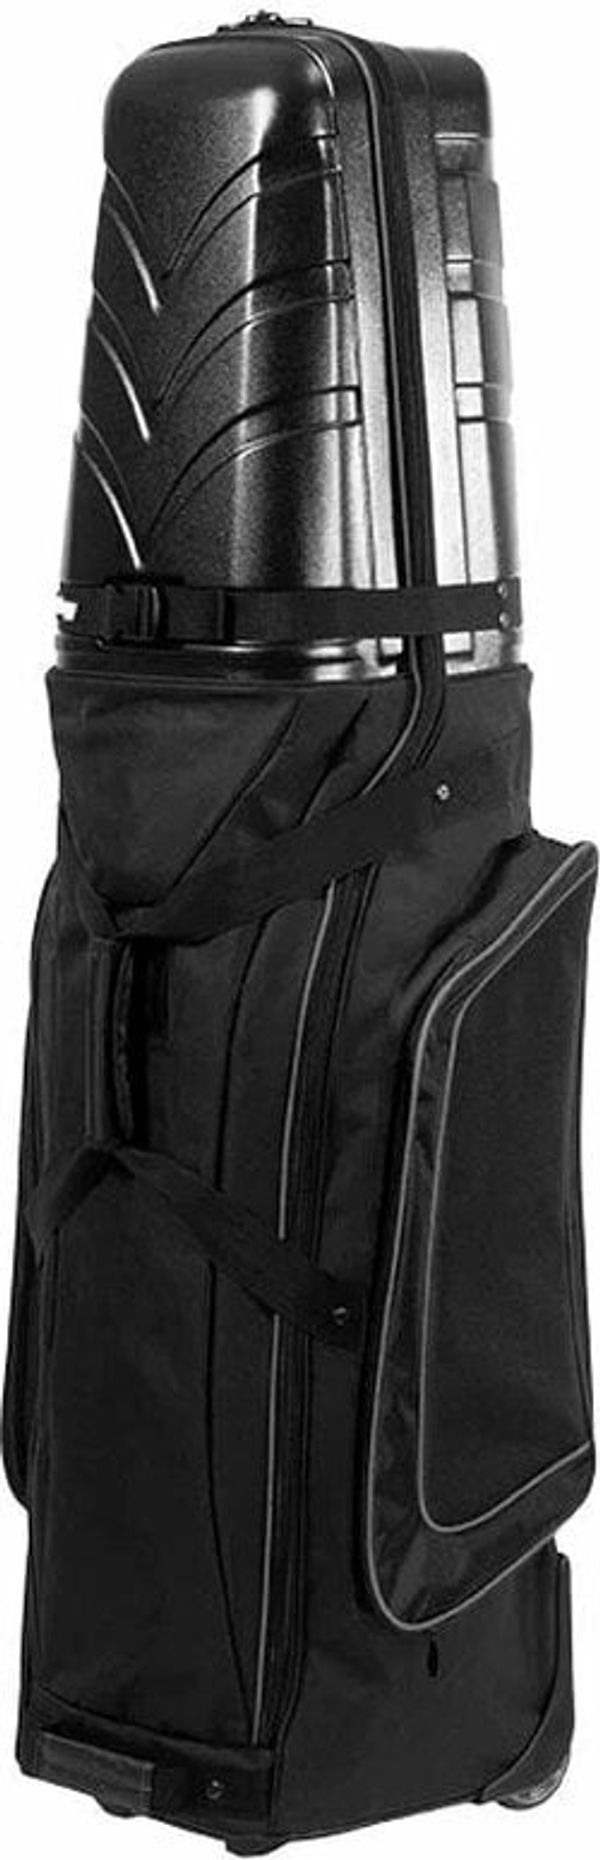 BagBoy BagBoy T-10 Travel Cover Black/Charcoal 2022